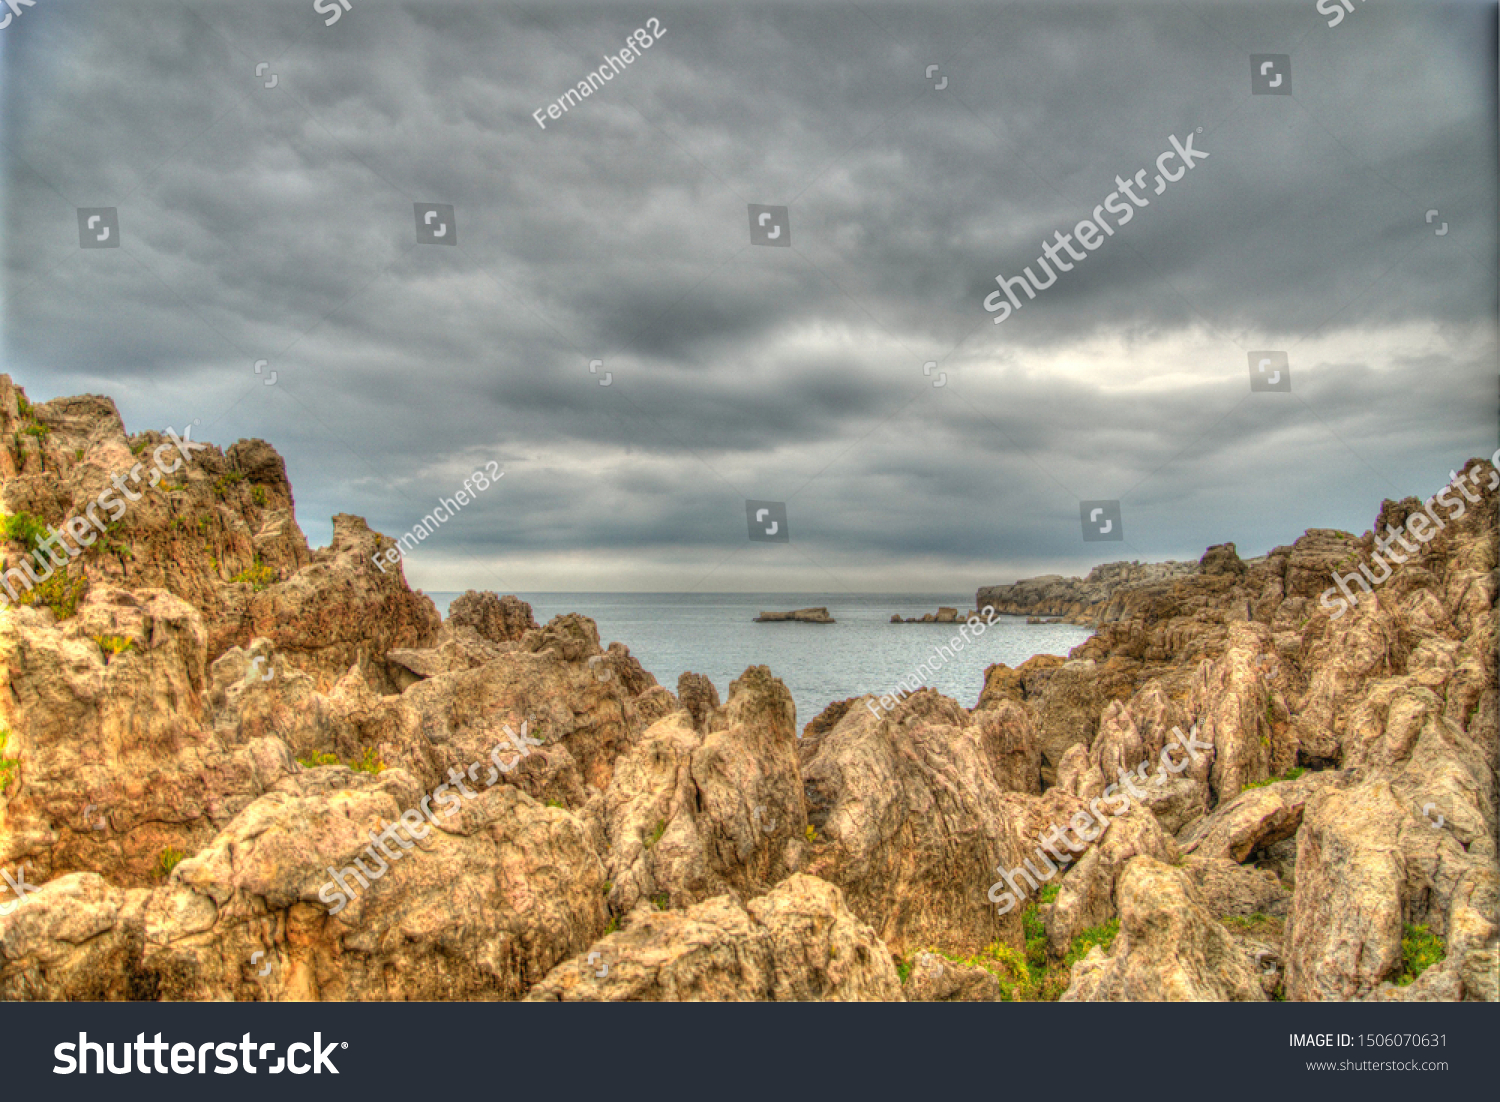 hdr artistic photography of a rocky sea landscape with dramatic dramatic sky #1506070631